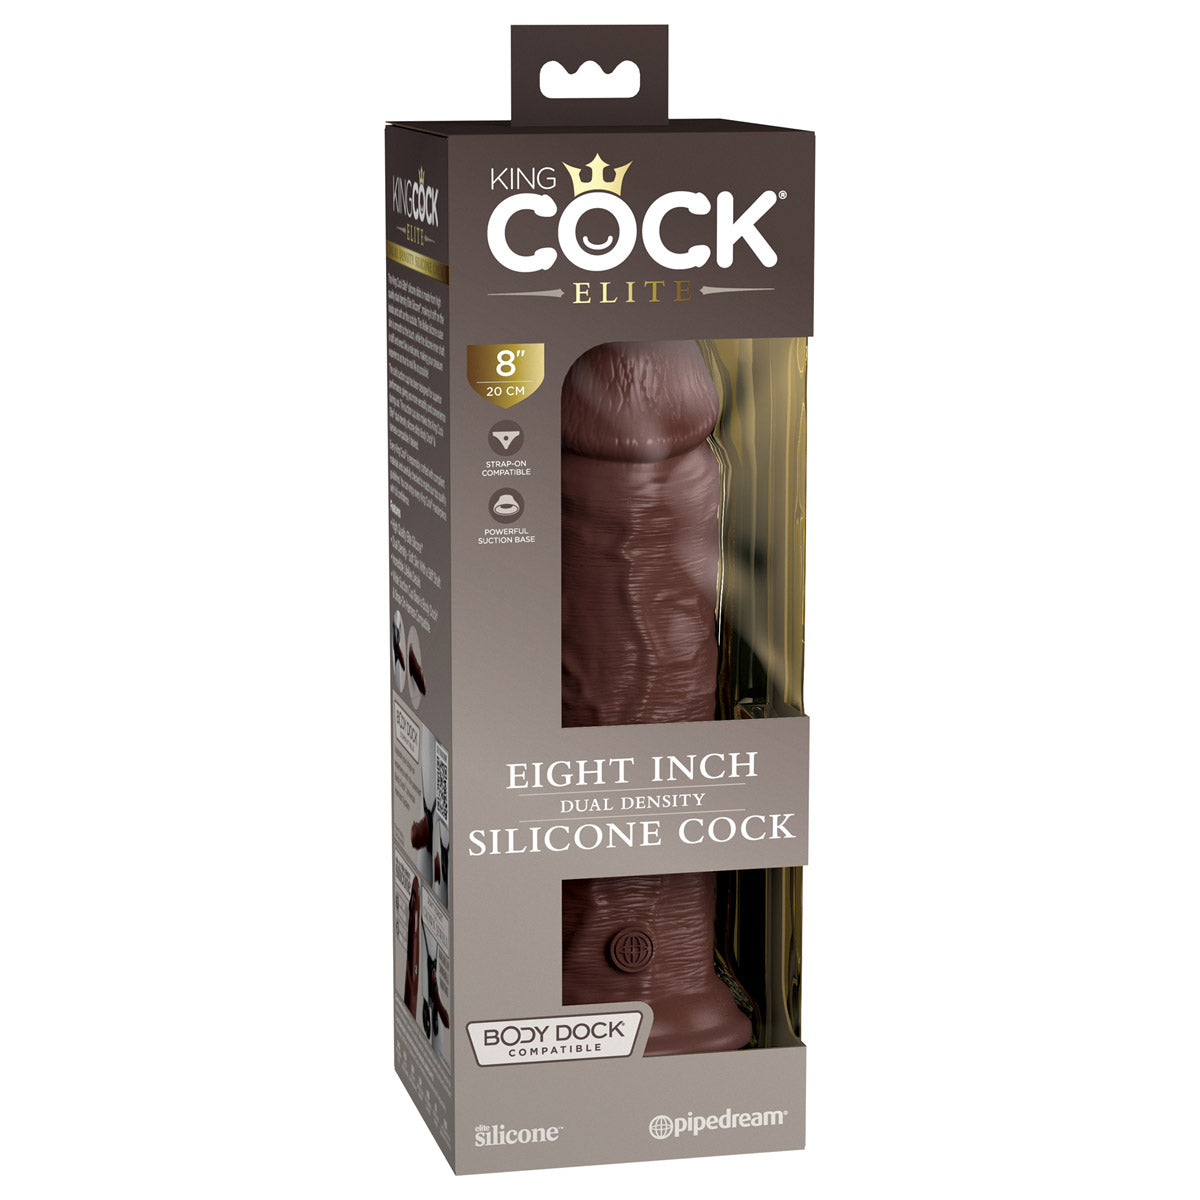 King Cock Elite 8" Silicone Dual Density Cock - Brown - Thorn & Feather Sex Toy Canada